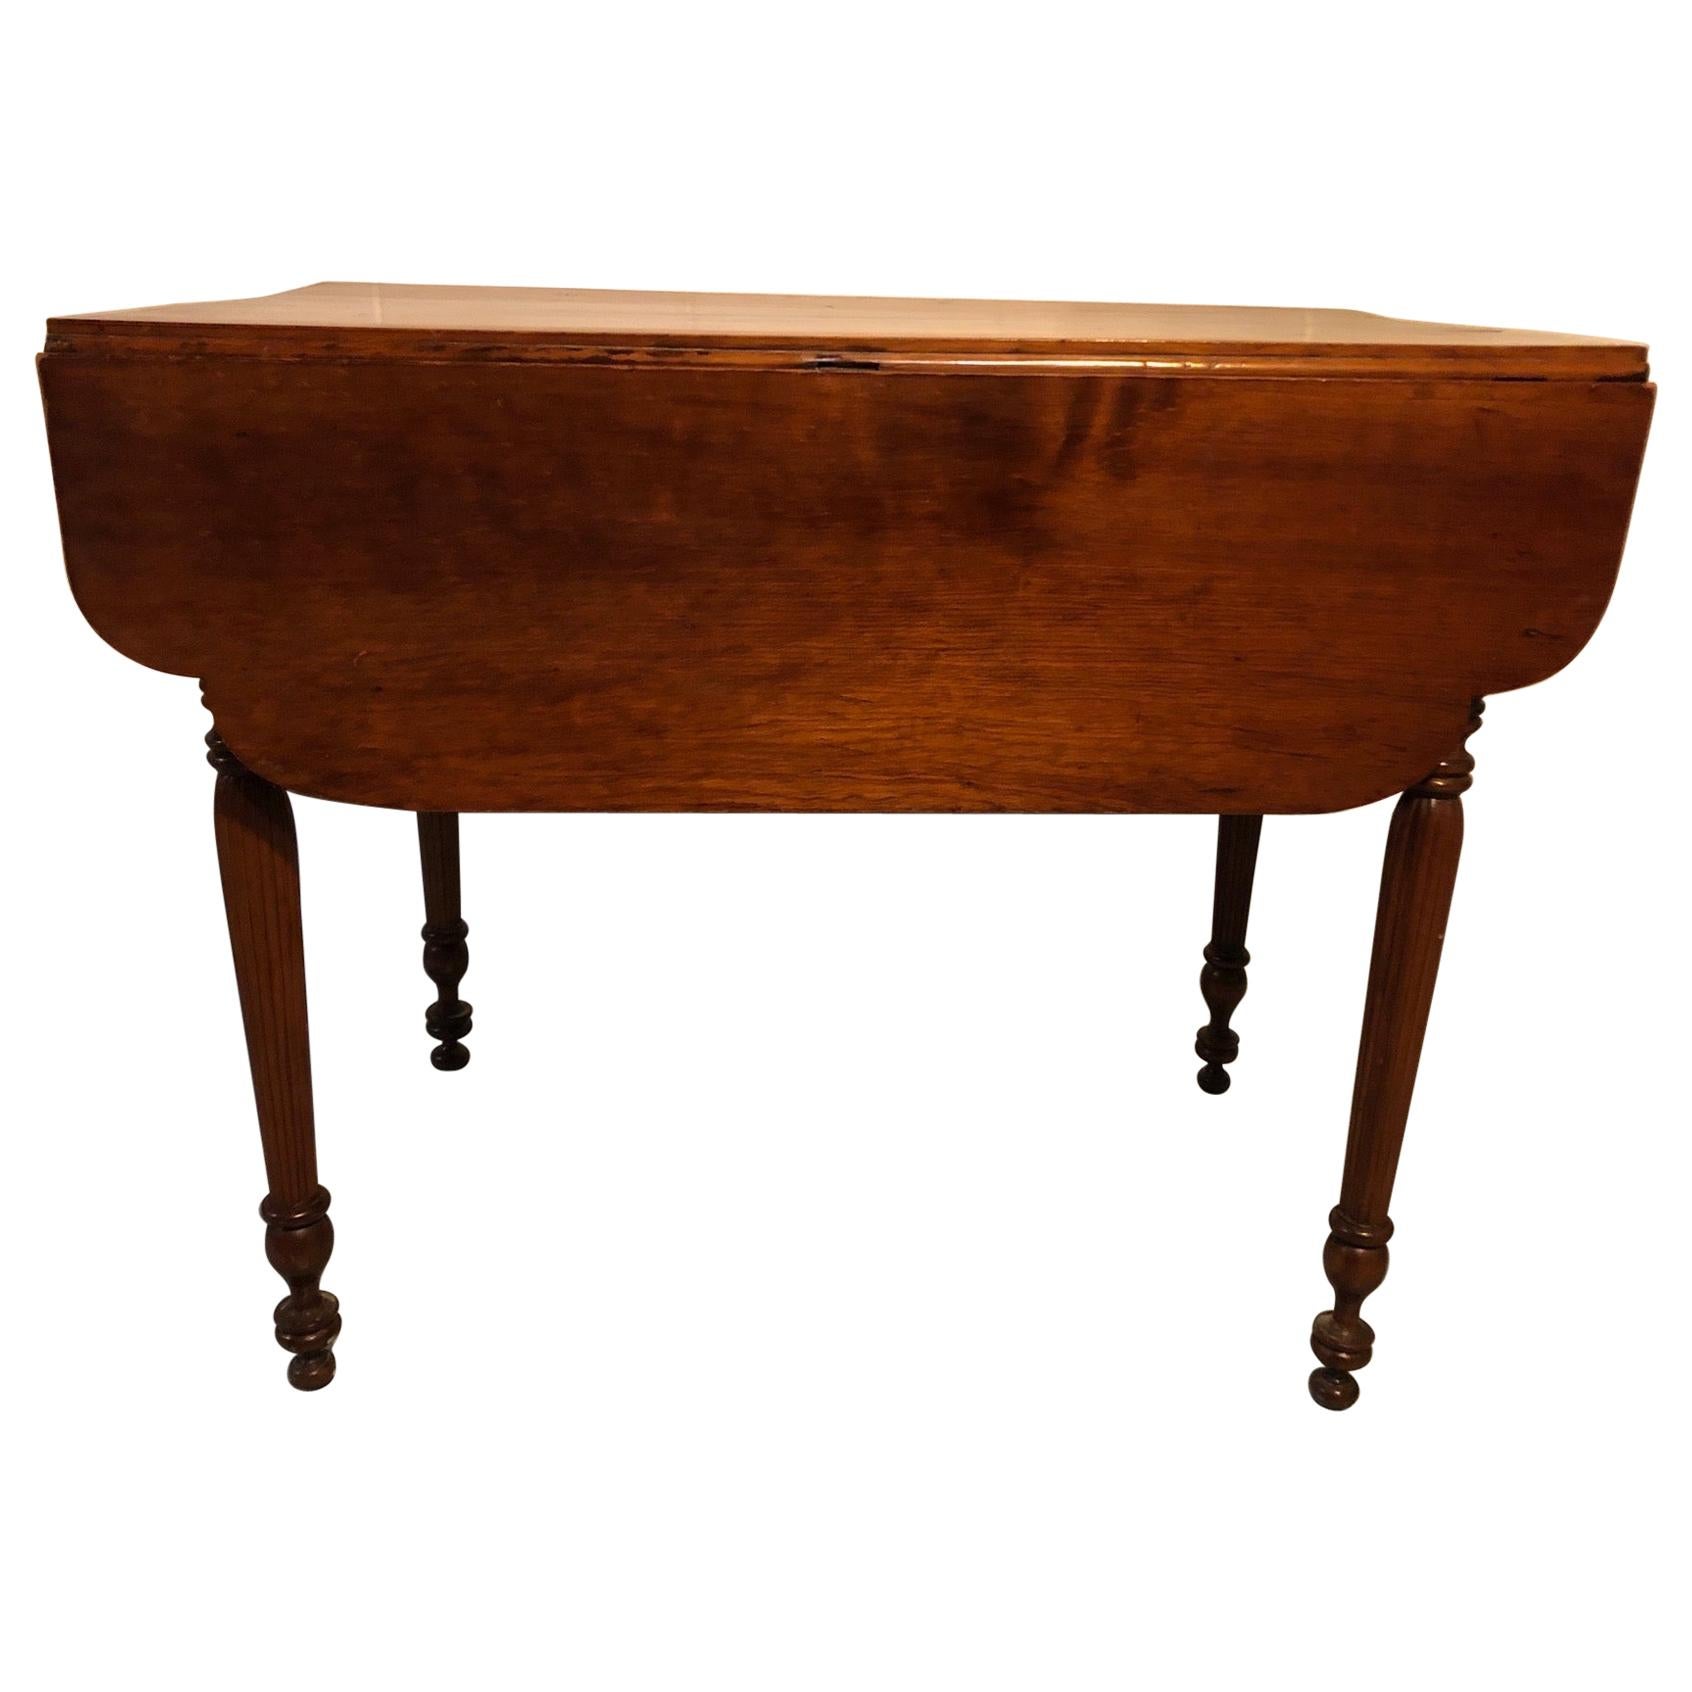 Classic English Cherry Drop-Leaf Table